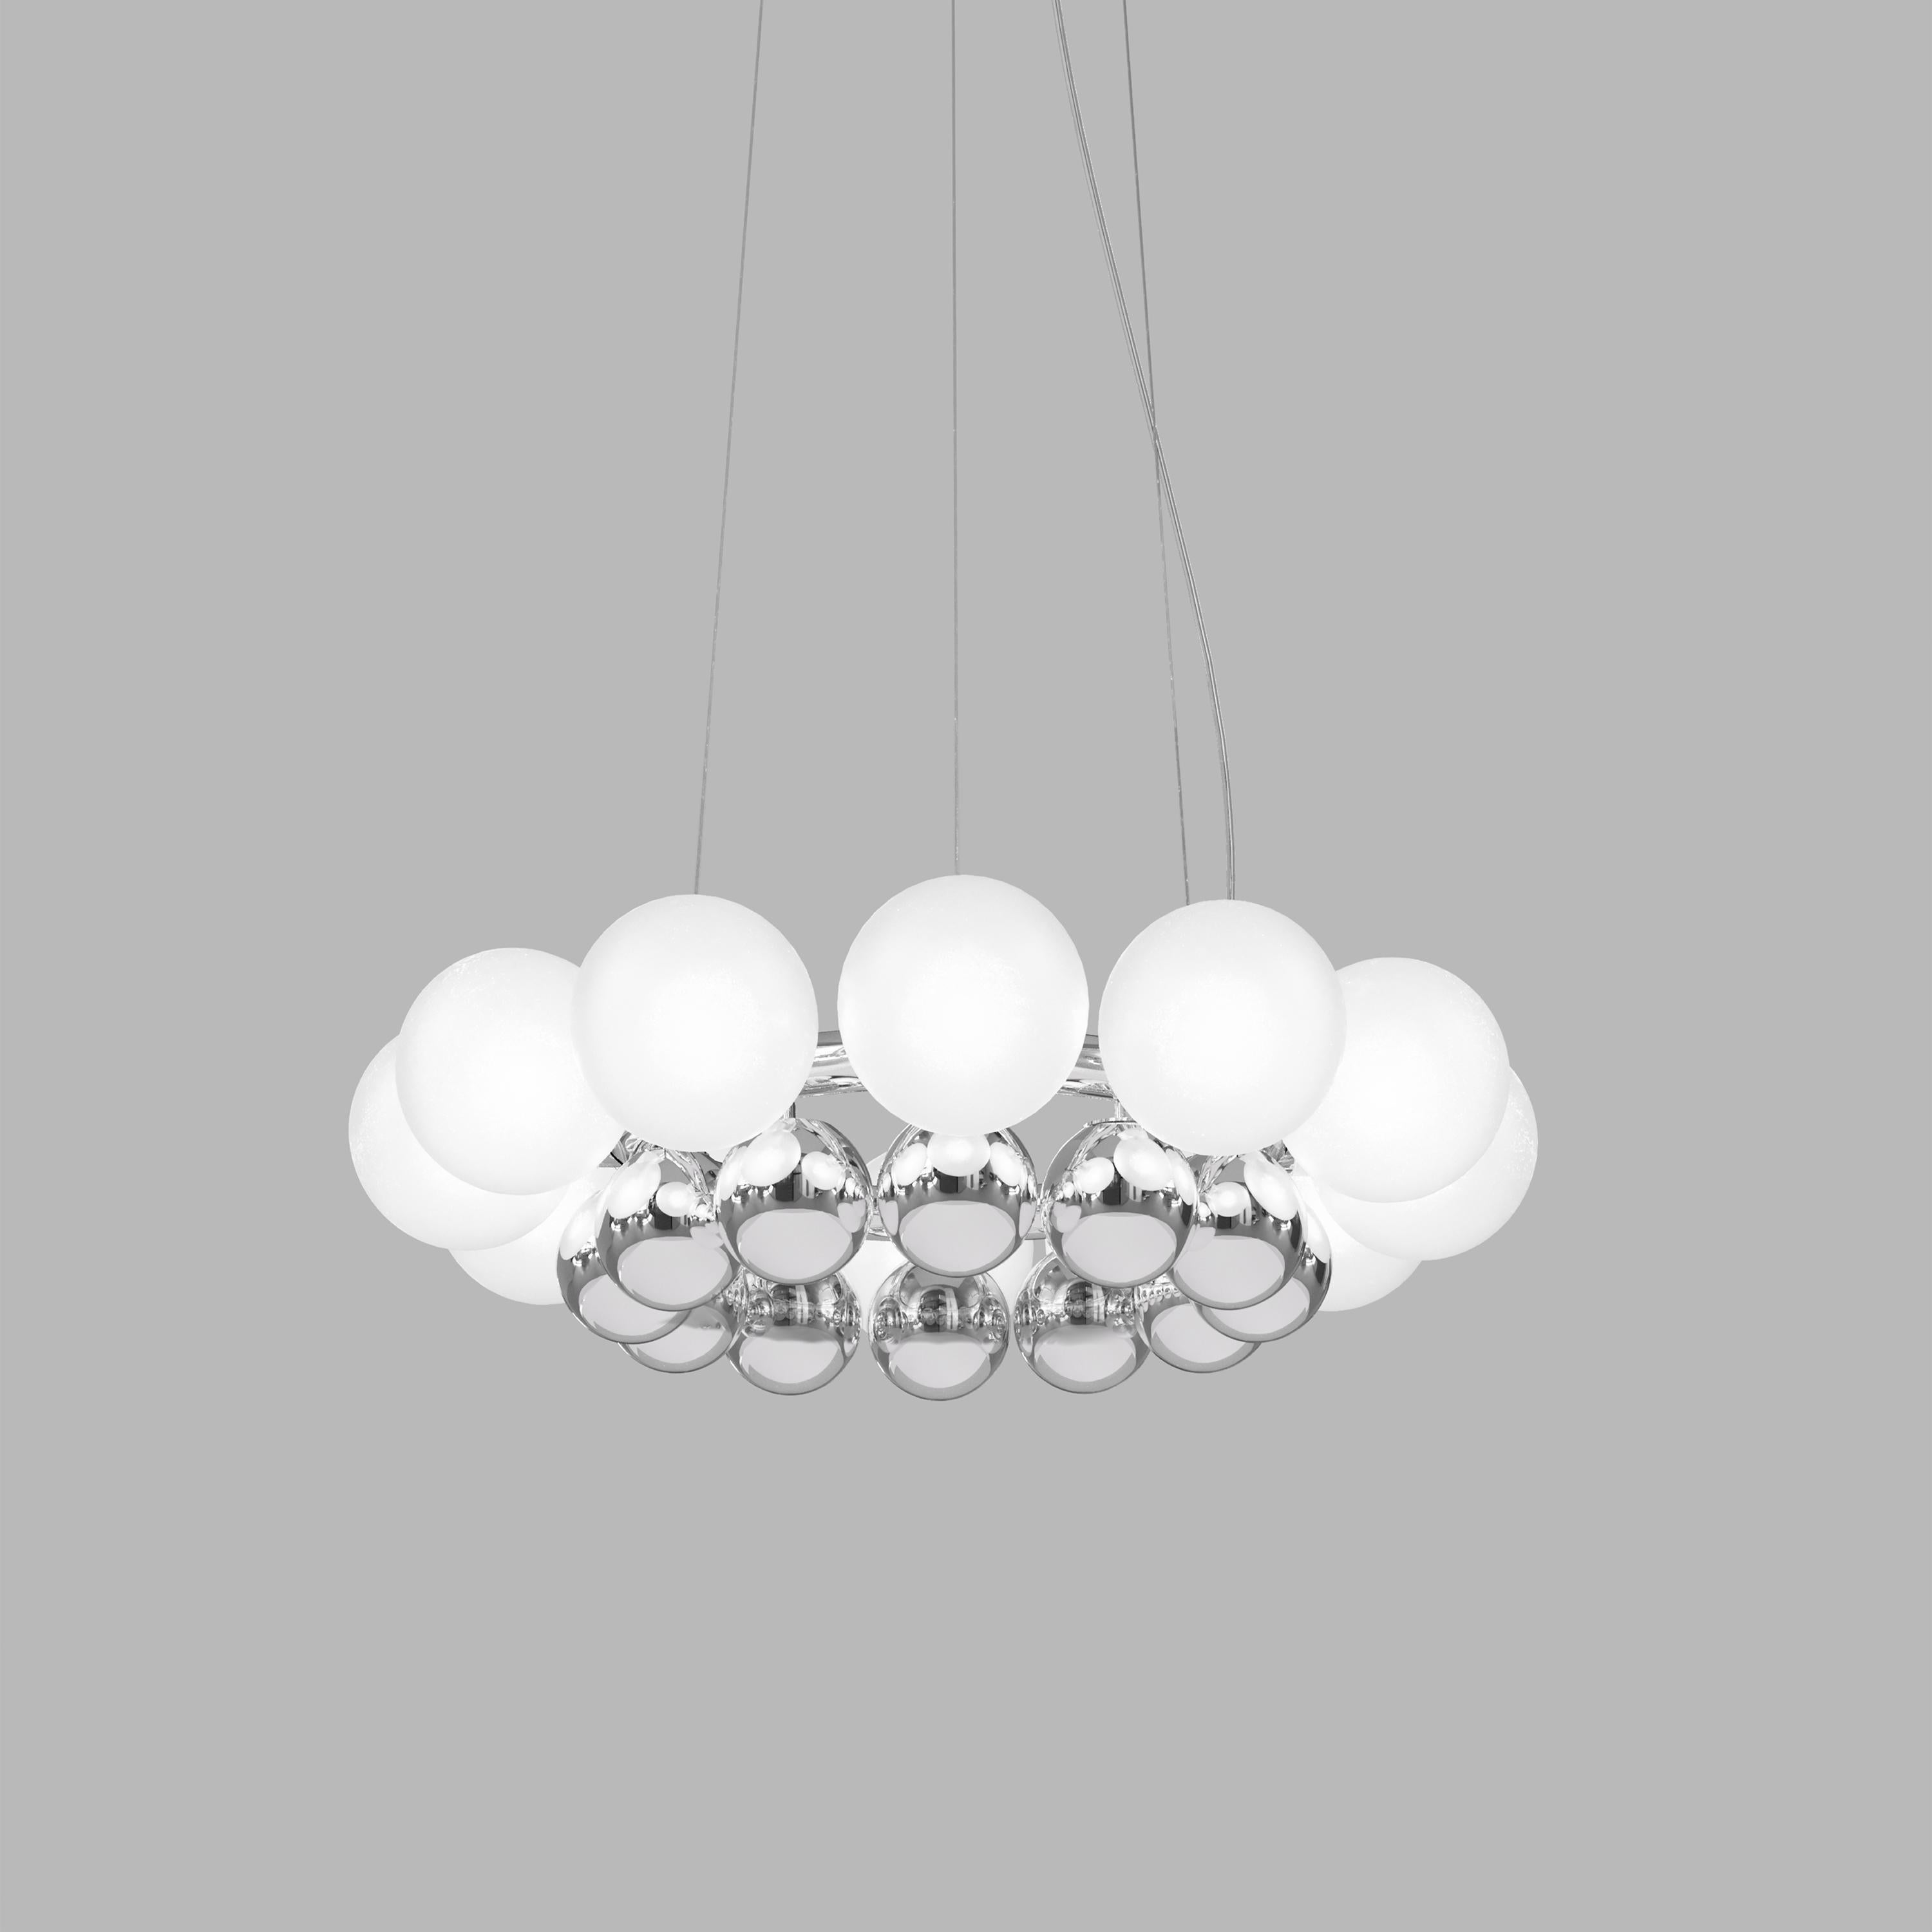 A composition made with two series of blown glass spheres in chrome and white colors and arranged in a two level ring that creates a kaleidoscopic effect of light and reflection. 

Specifications: 
Light source: G9
No of bulbs: 12×33W